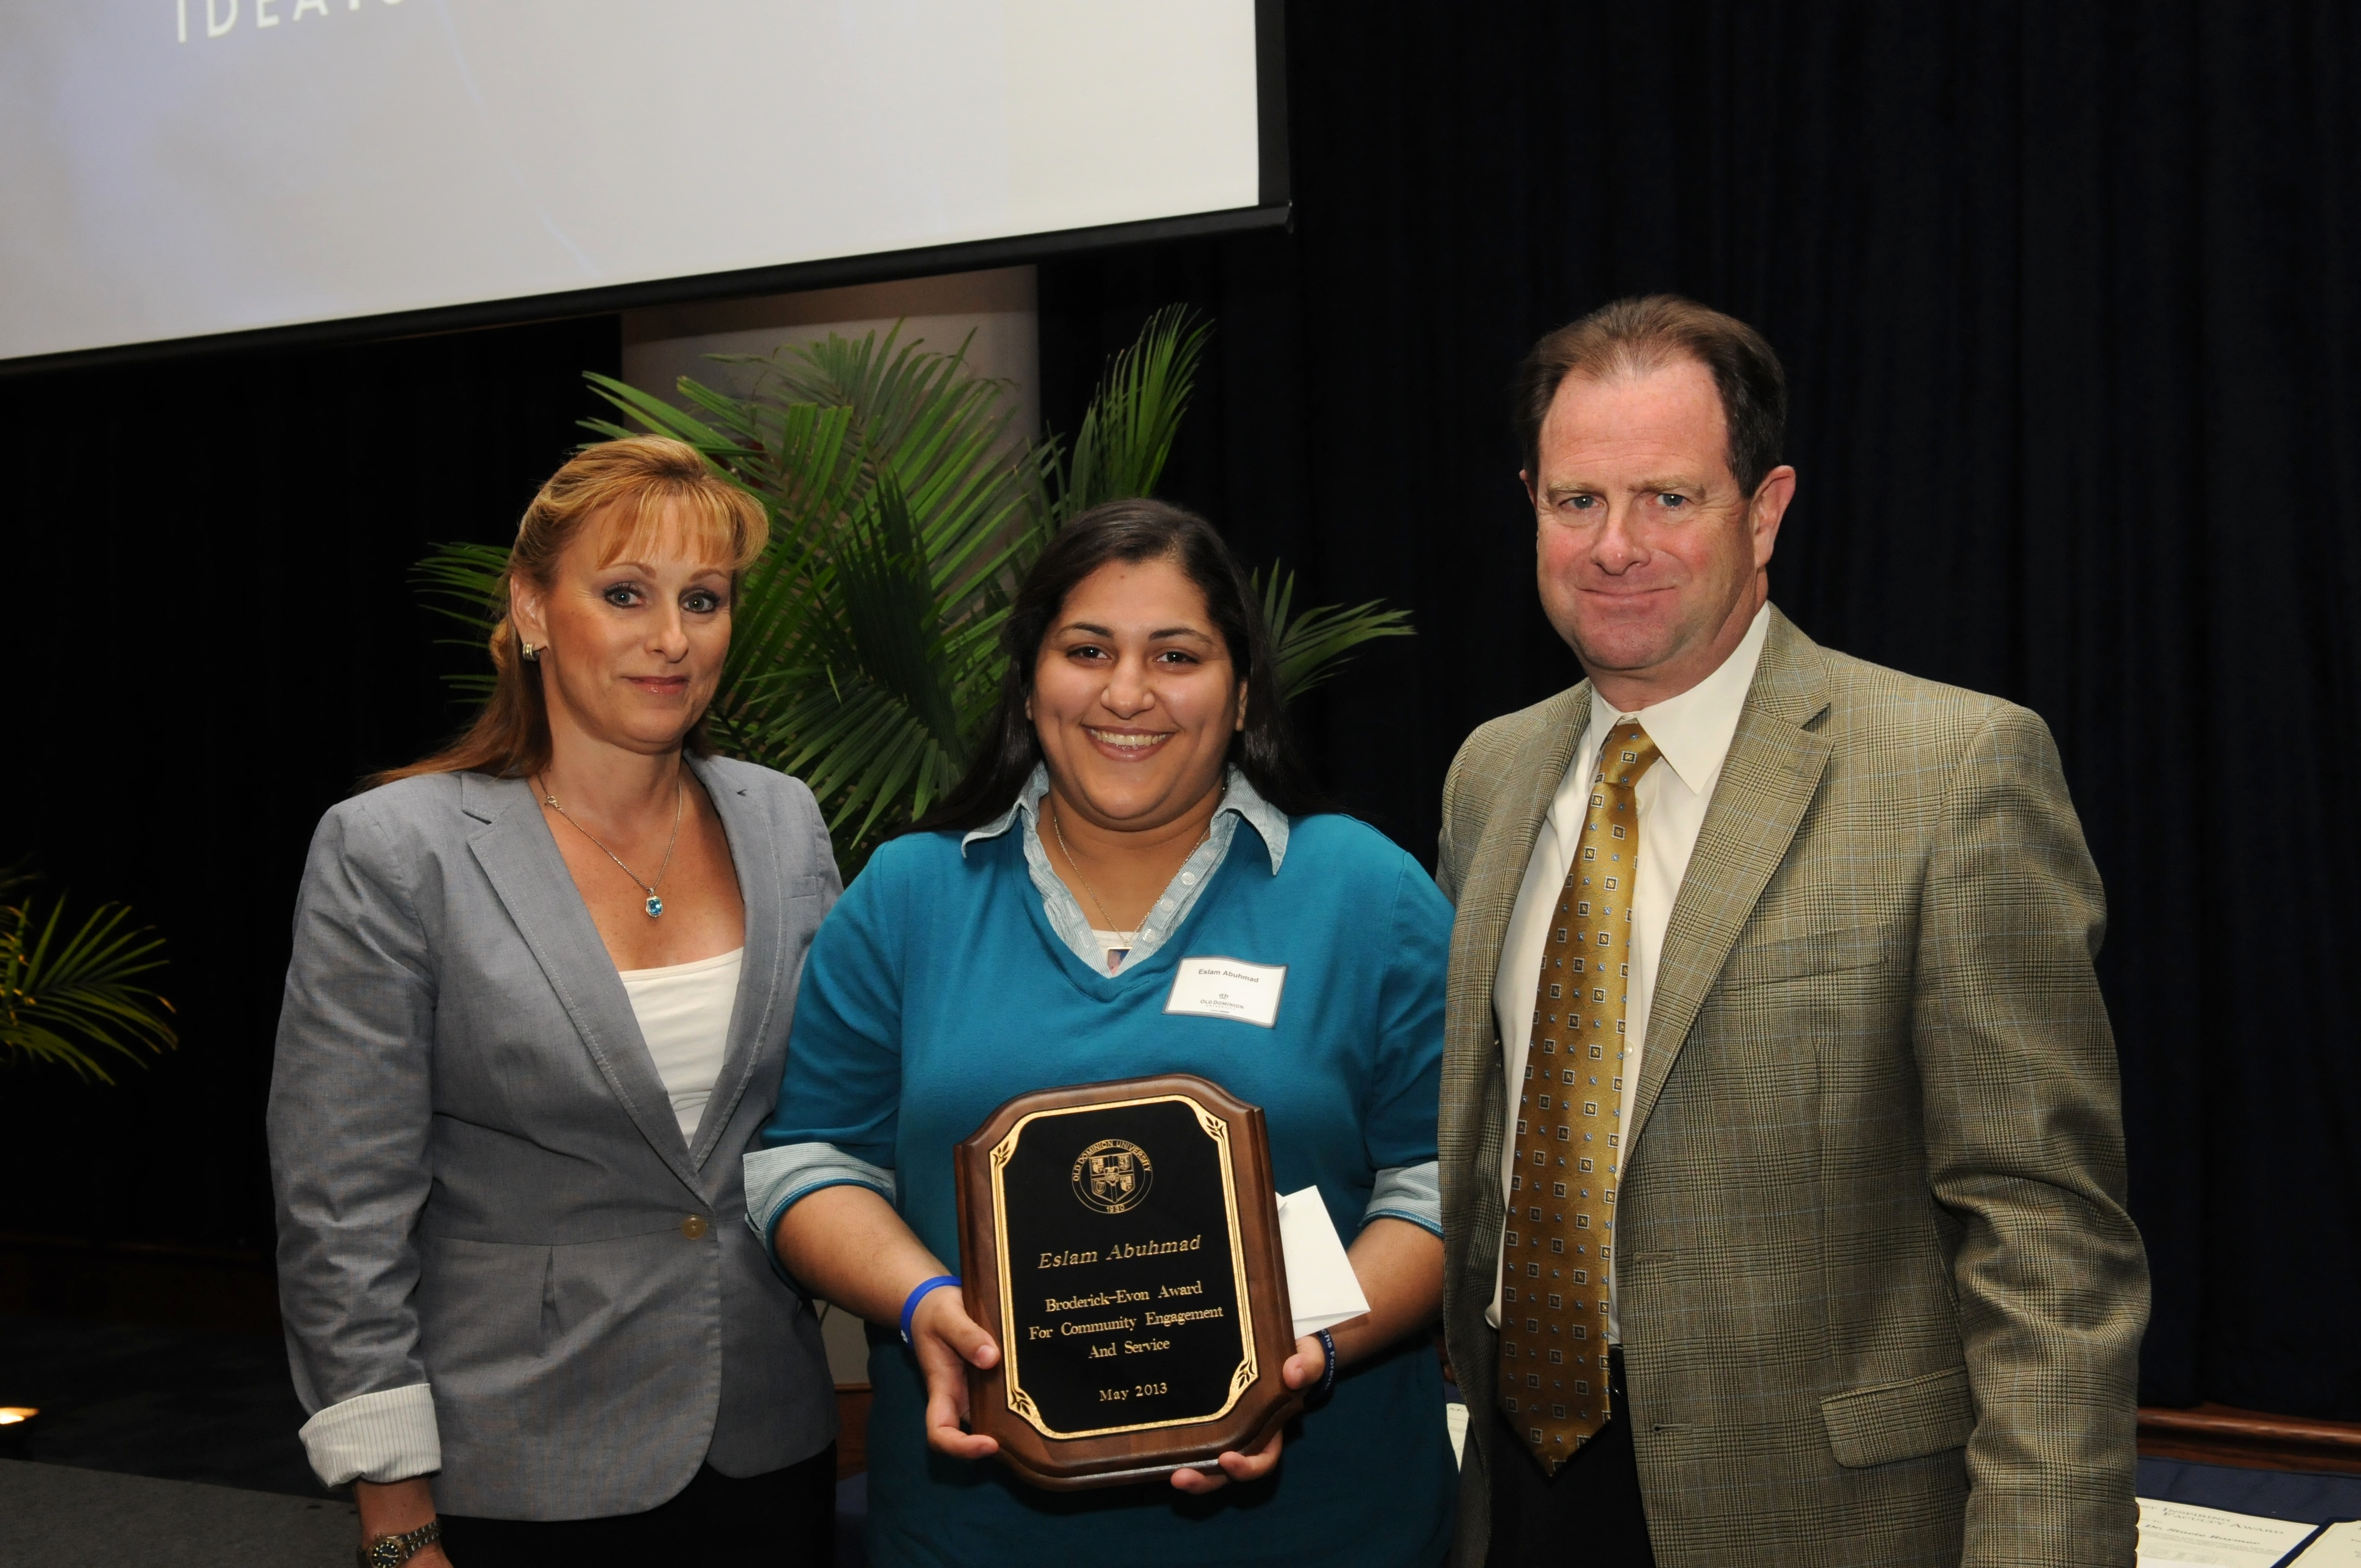 Photo of Broderick Evon award winner Eslam Abuhmad (center) with President Broderick and his wife Kate.